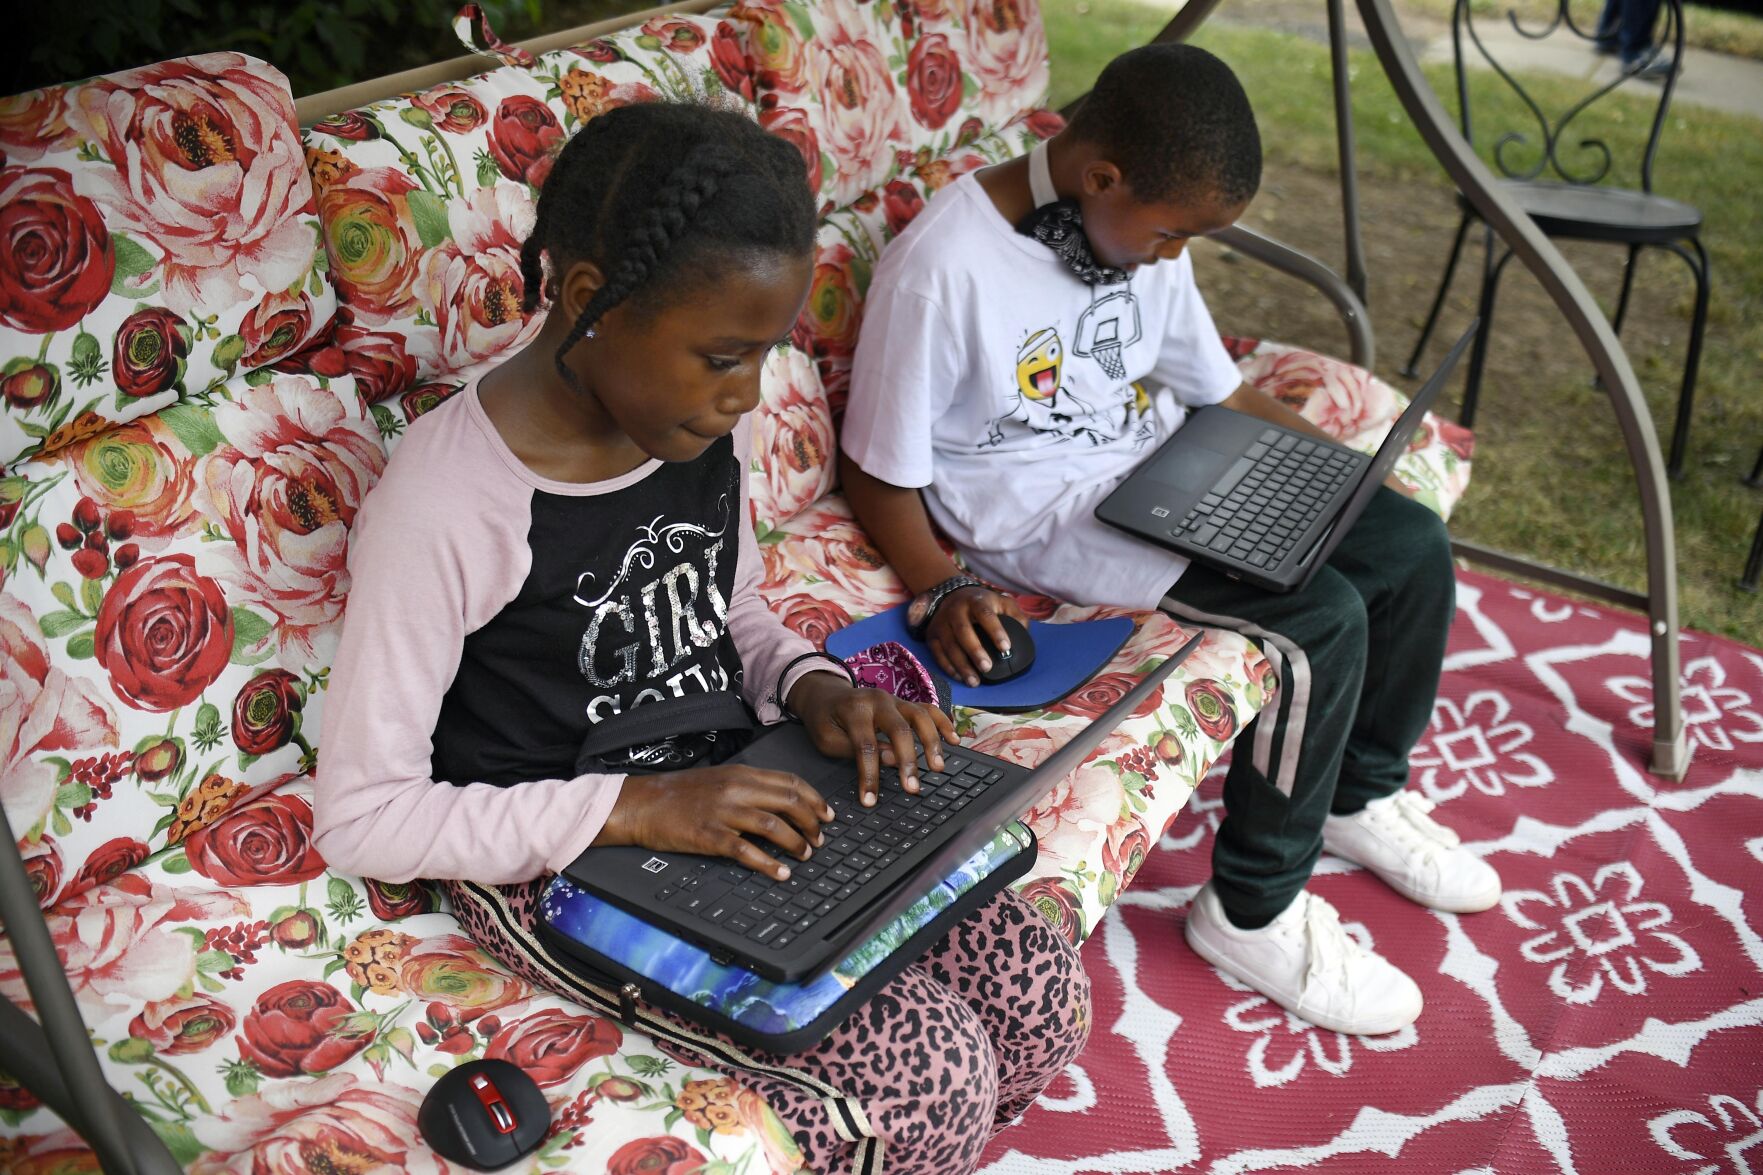 <p>FILE - Fourth-grader Sammiayah Thompson, left, and her brother third-grader Nehemiah Thompson work outside in their yard on laptops provided by their school system for distant learning, in Hartford, Conn., on June 5, 2020. In interviews with The Associated Press, close to 50 school leaders, teachers, parents and health officials reflected on decisions to keep students in extended online learning, especially during the spring semester of 2021. (AP Photo/Jessica Hill)</p>   PHOTO CREDIT: Jessica Hill - freelancer, FR125654 AP